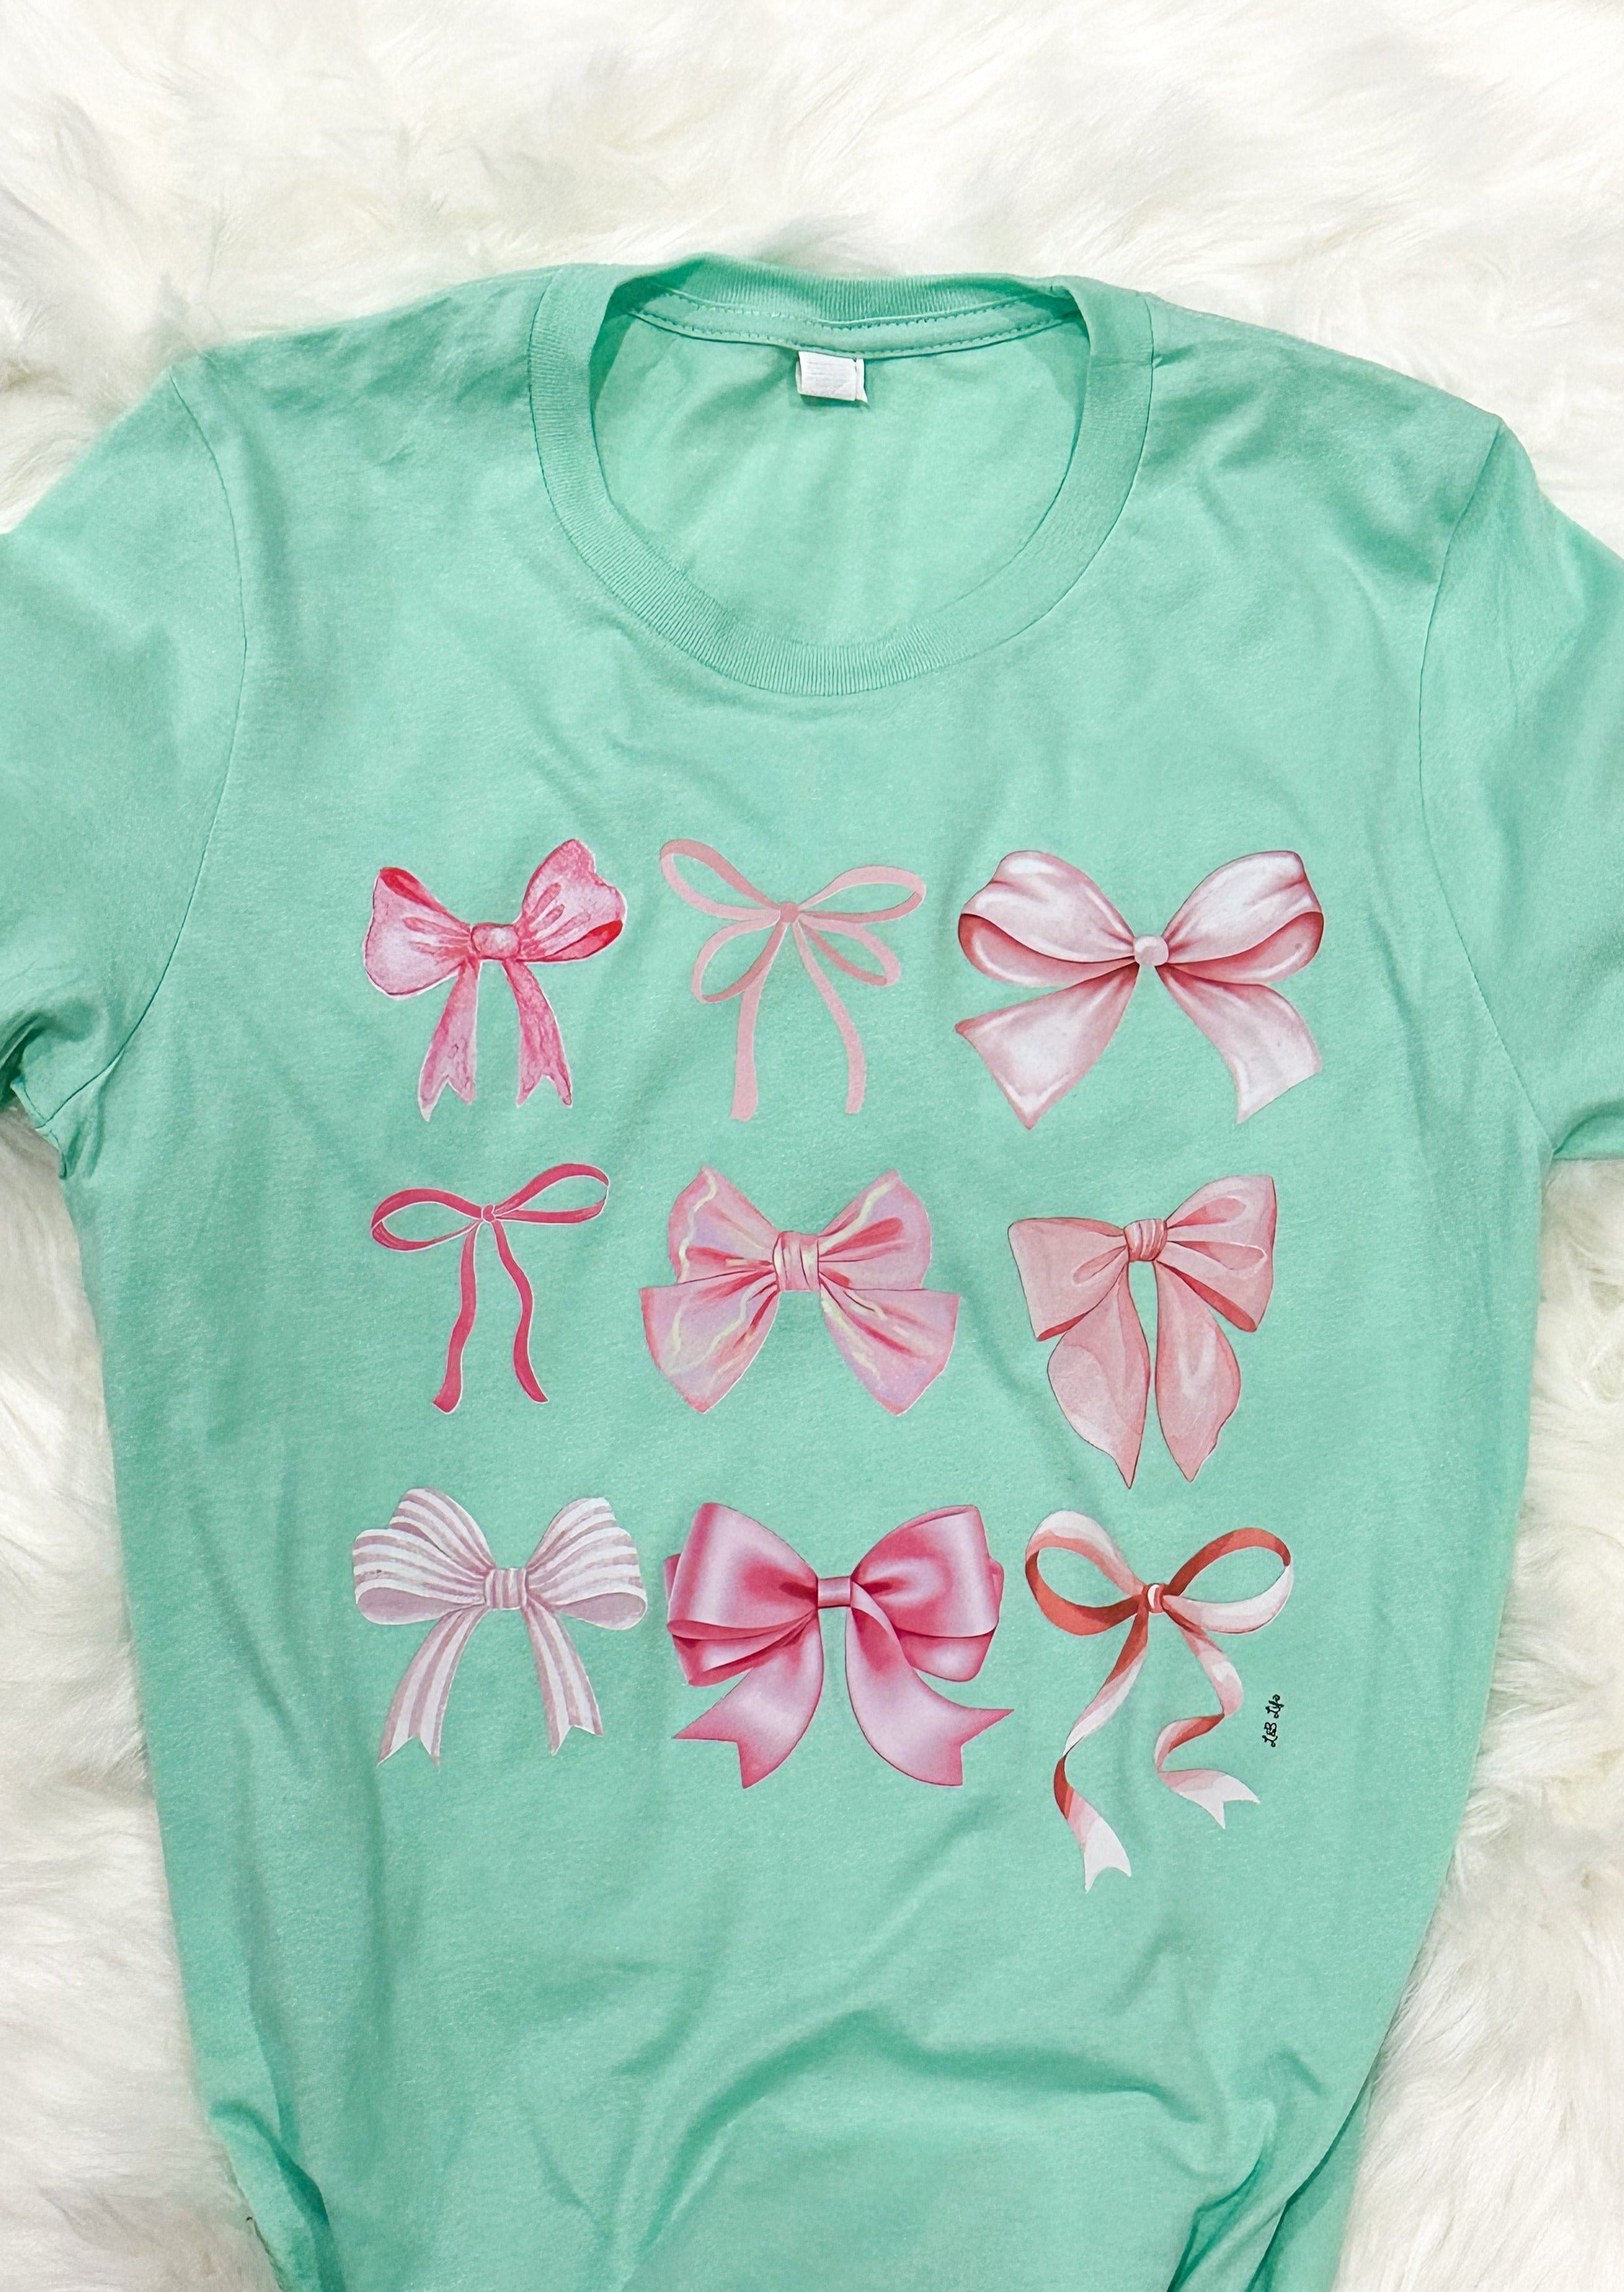 mint green Bella Canvas tee shirt with 9 different bows printed on it in pink